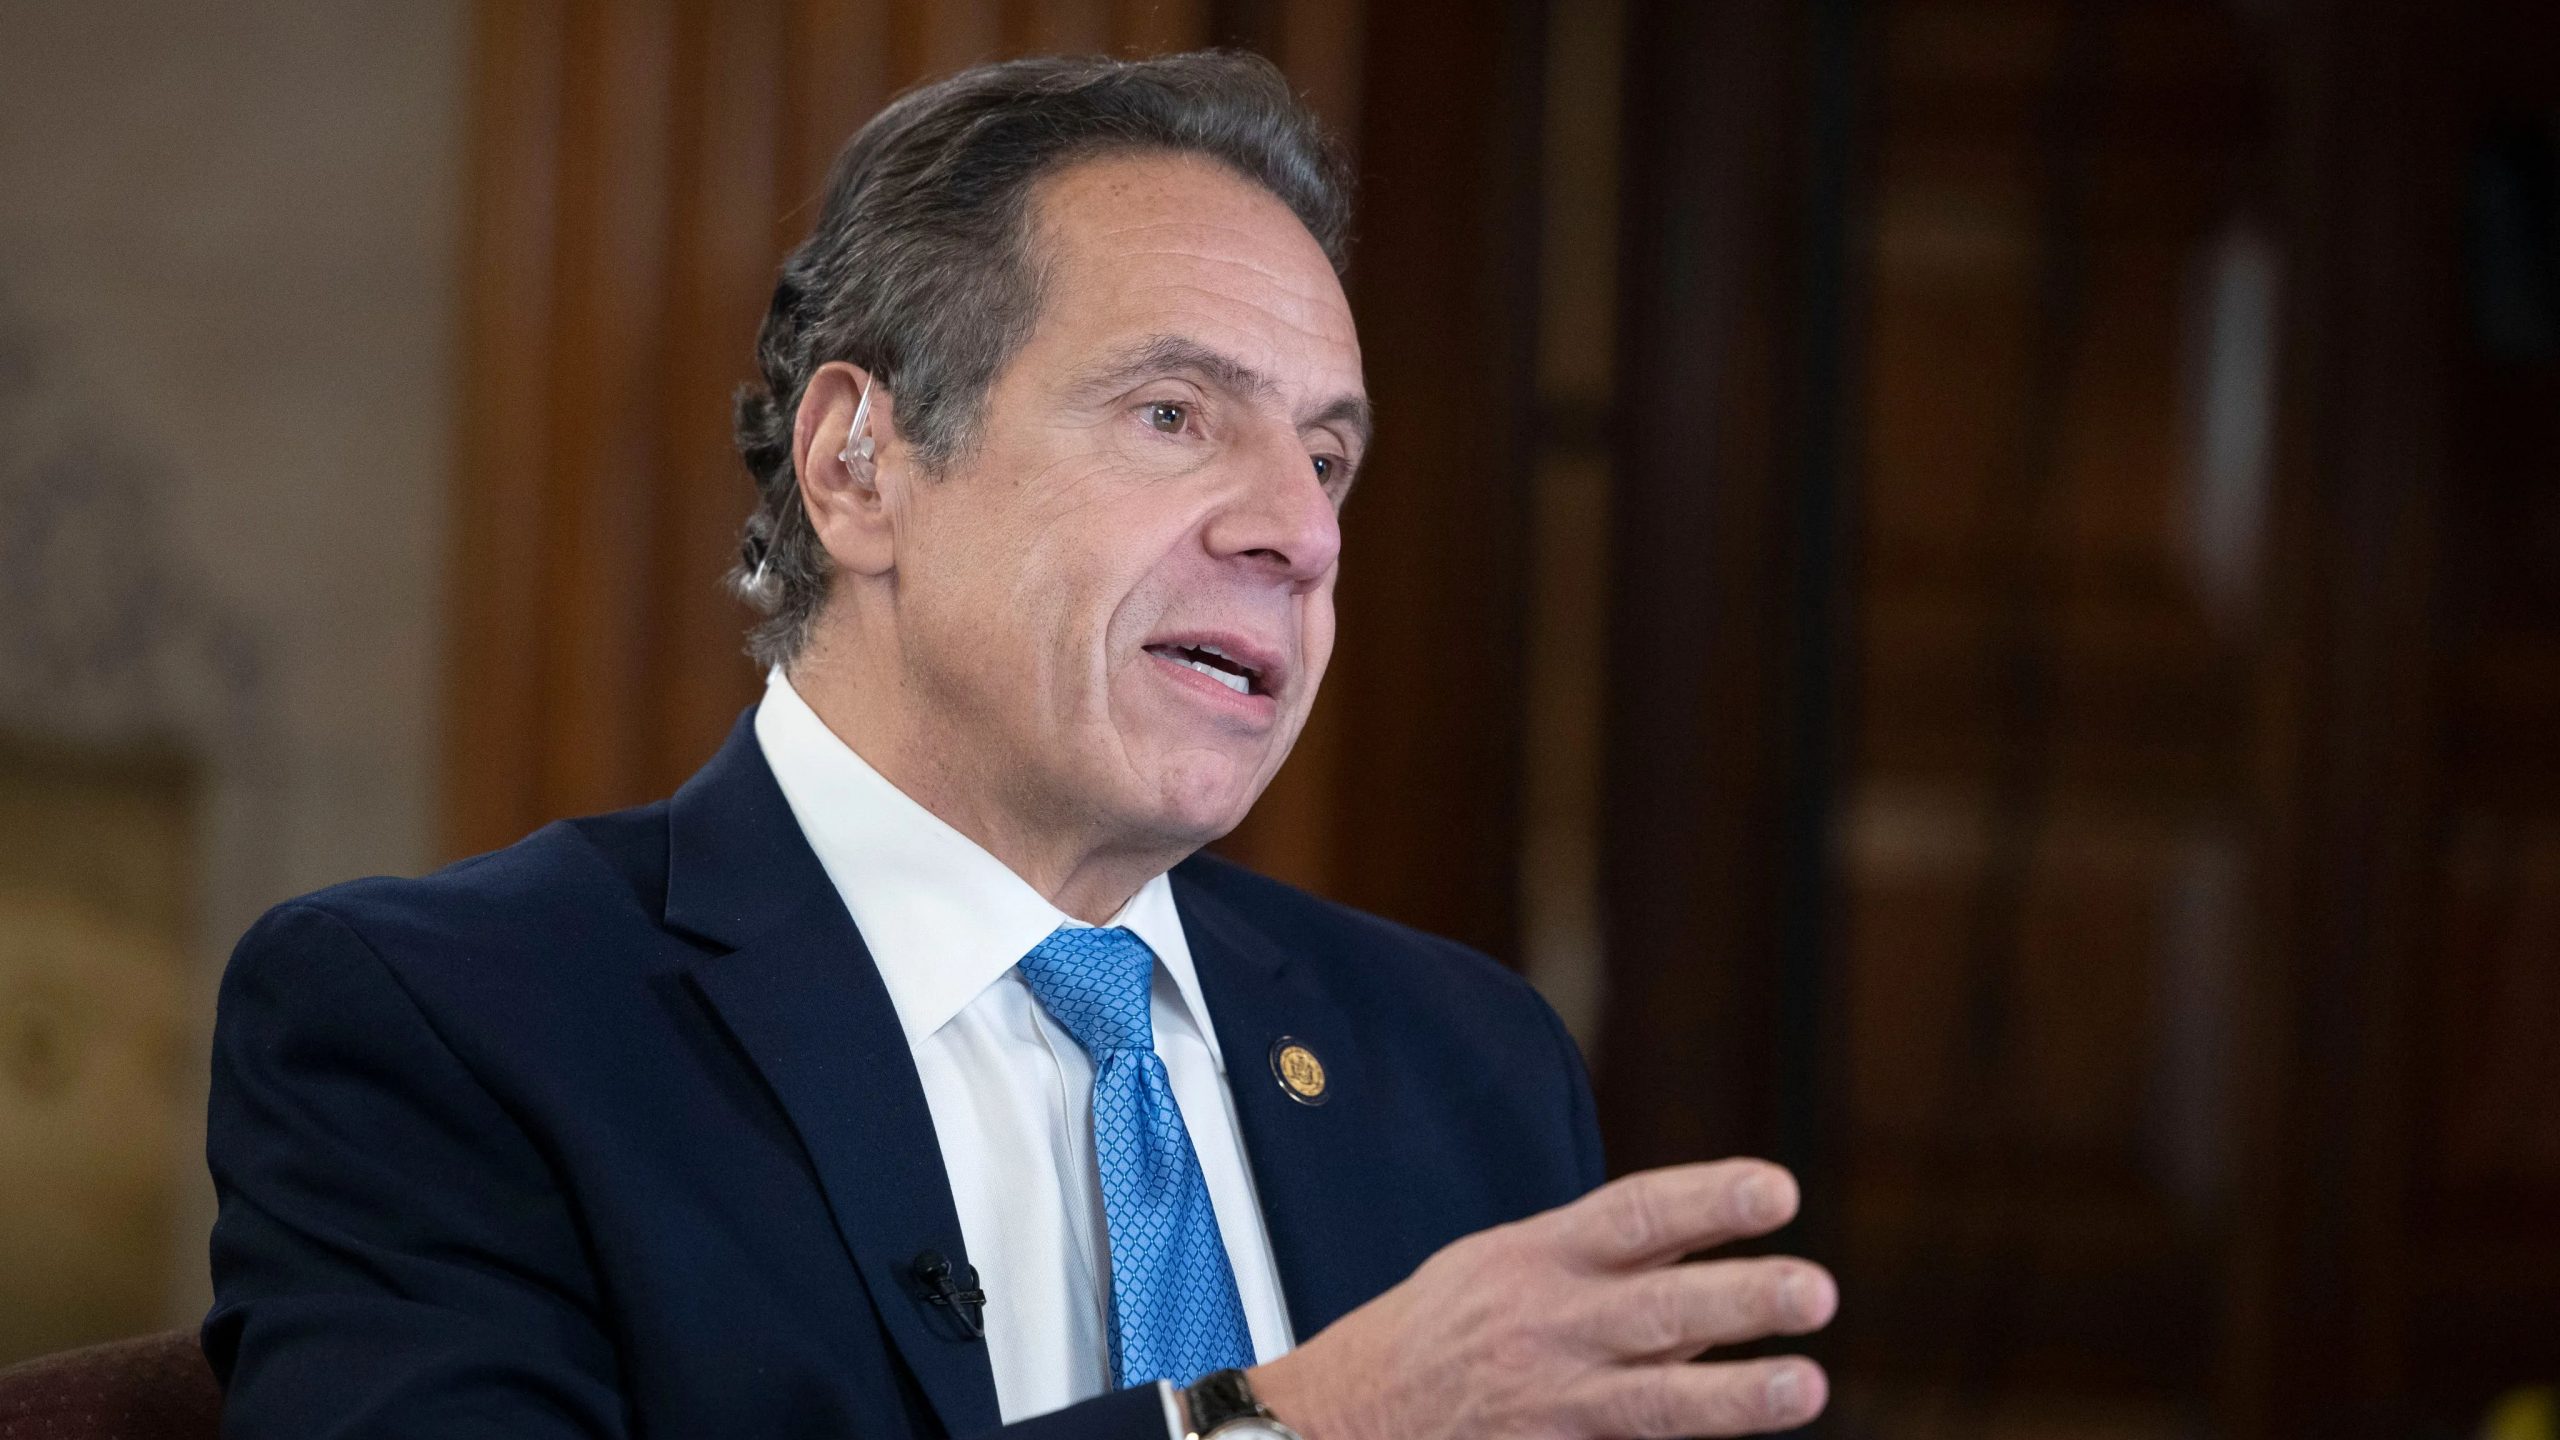 NY Governor Andrew Cuomo accused by current aide of inappropriate behaviour